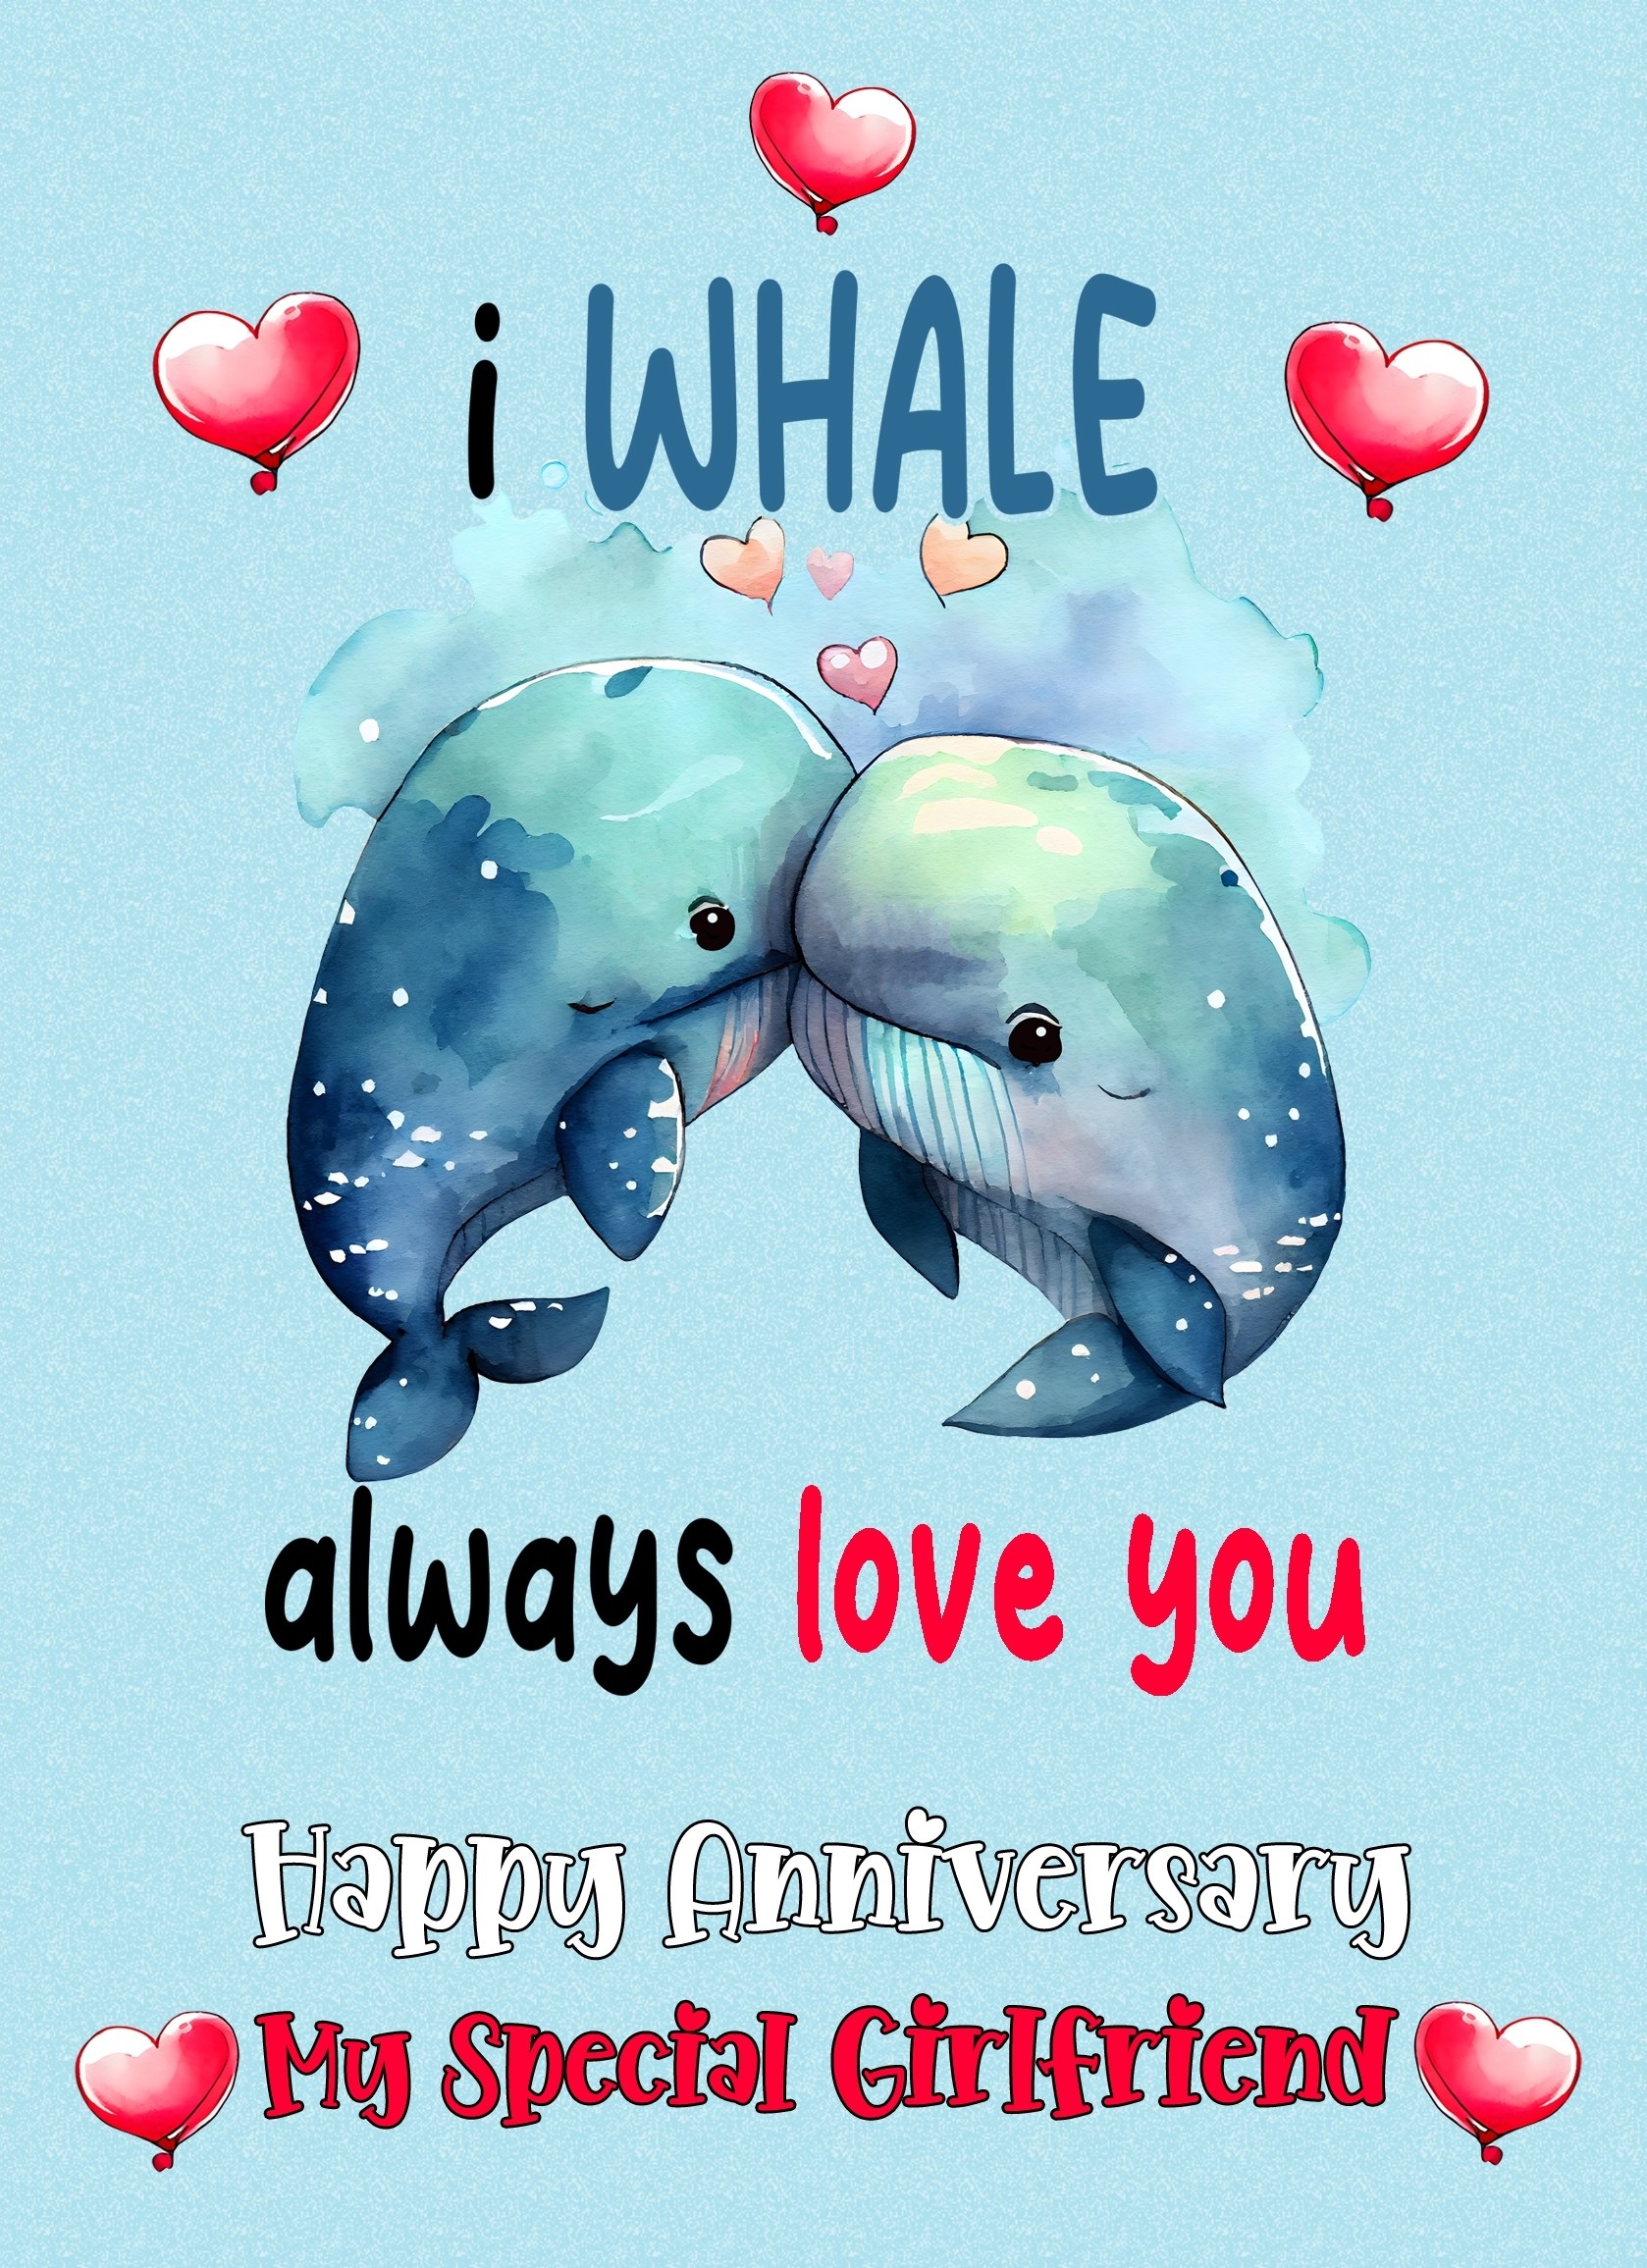 Funny Pun Romantic Anniversary Card for Girlfriend (Whale)